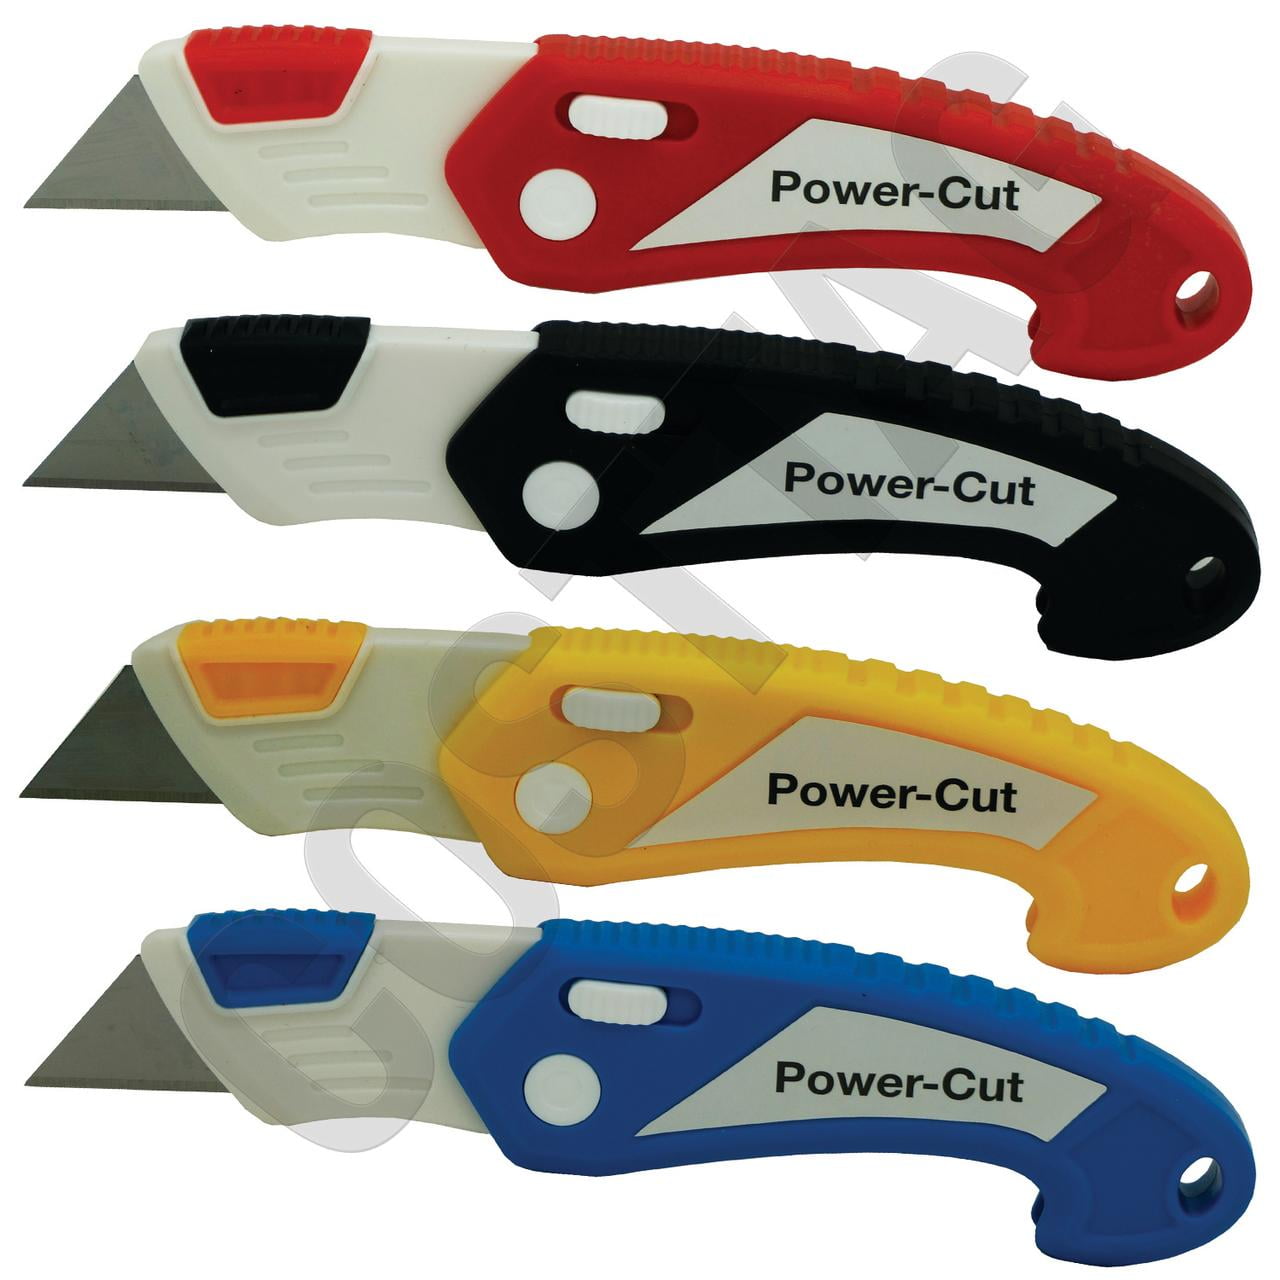 TIFICAL 3-Pack Box Cutter, Utility Knife with Self-Locking Design